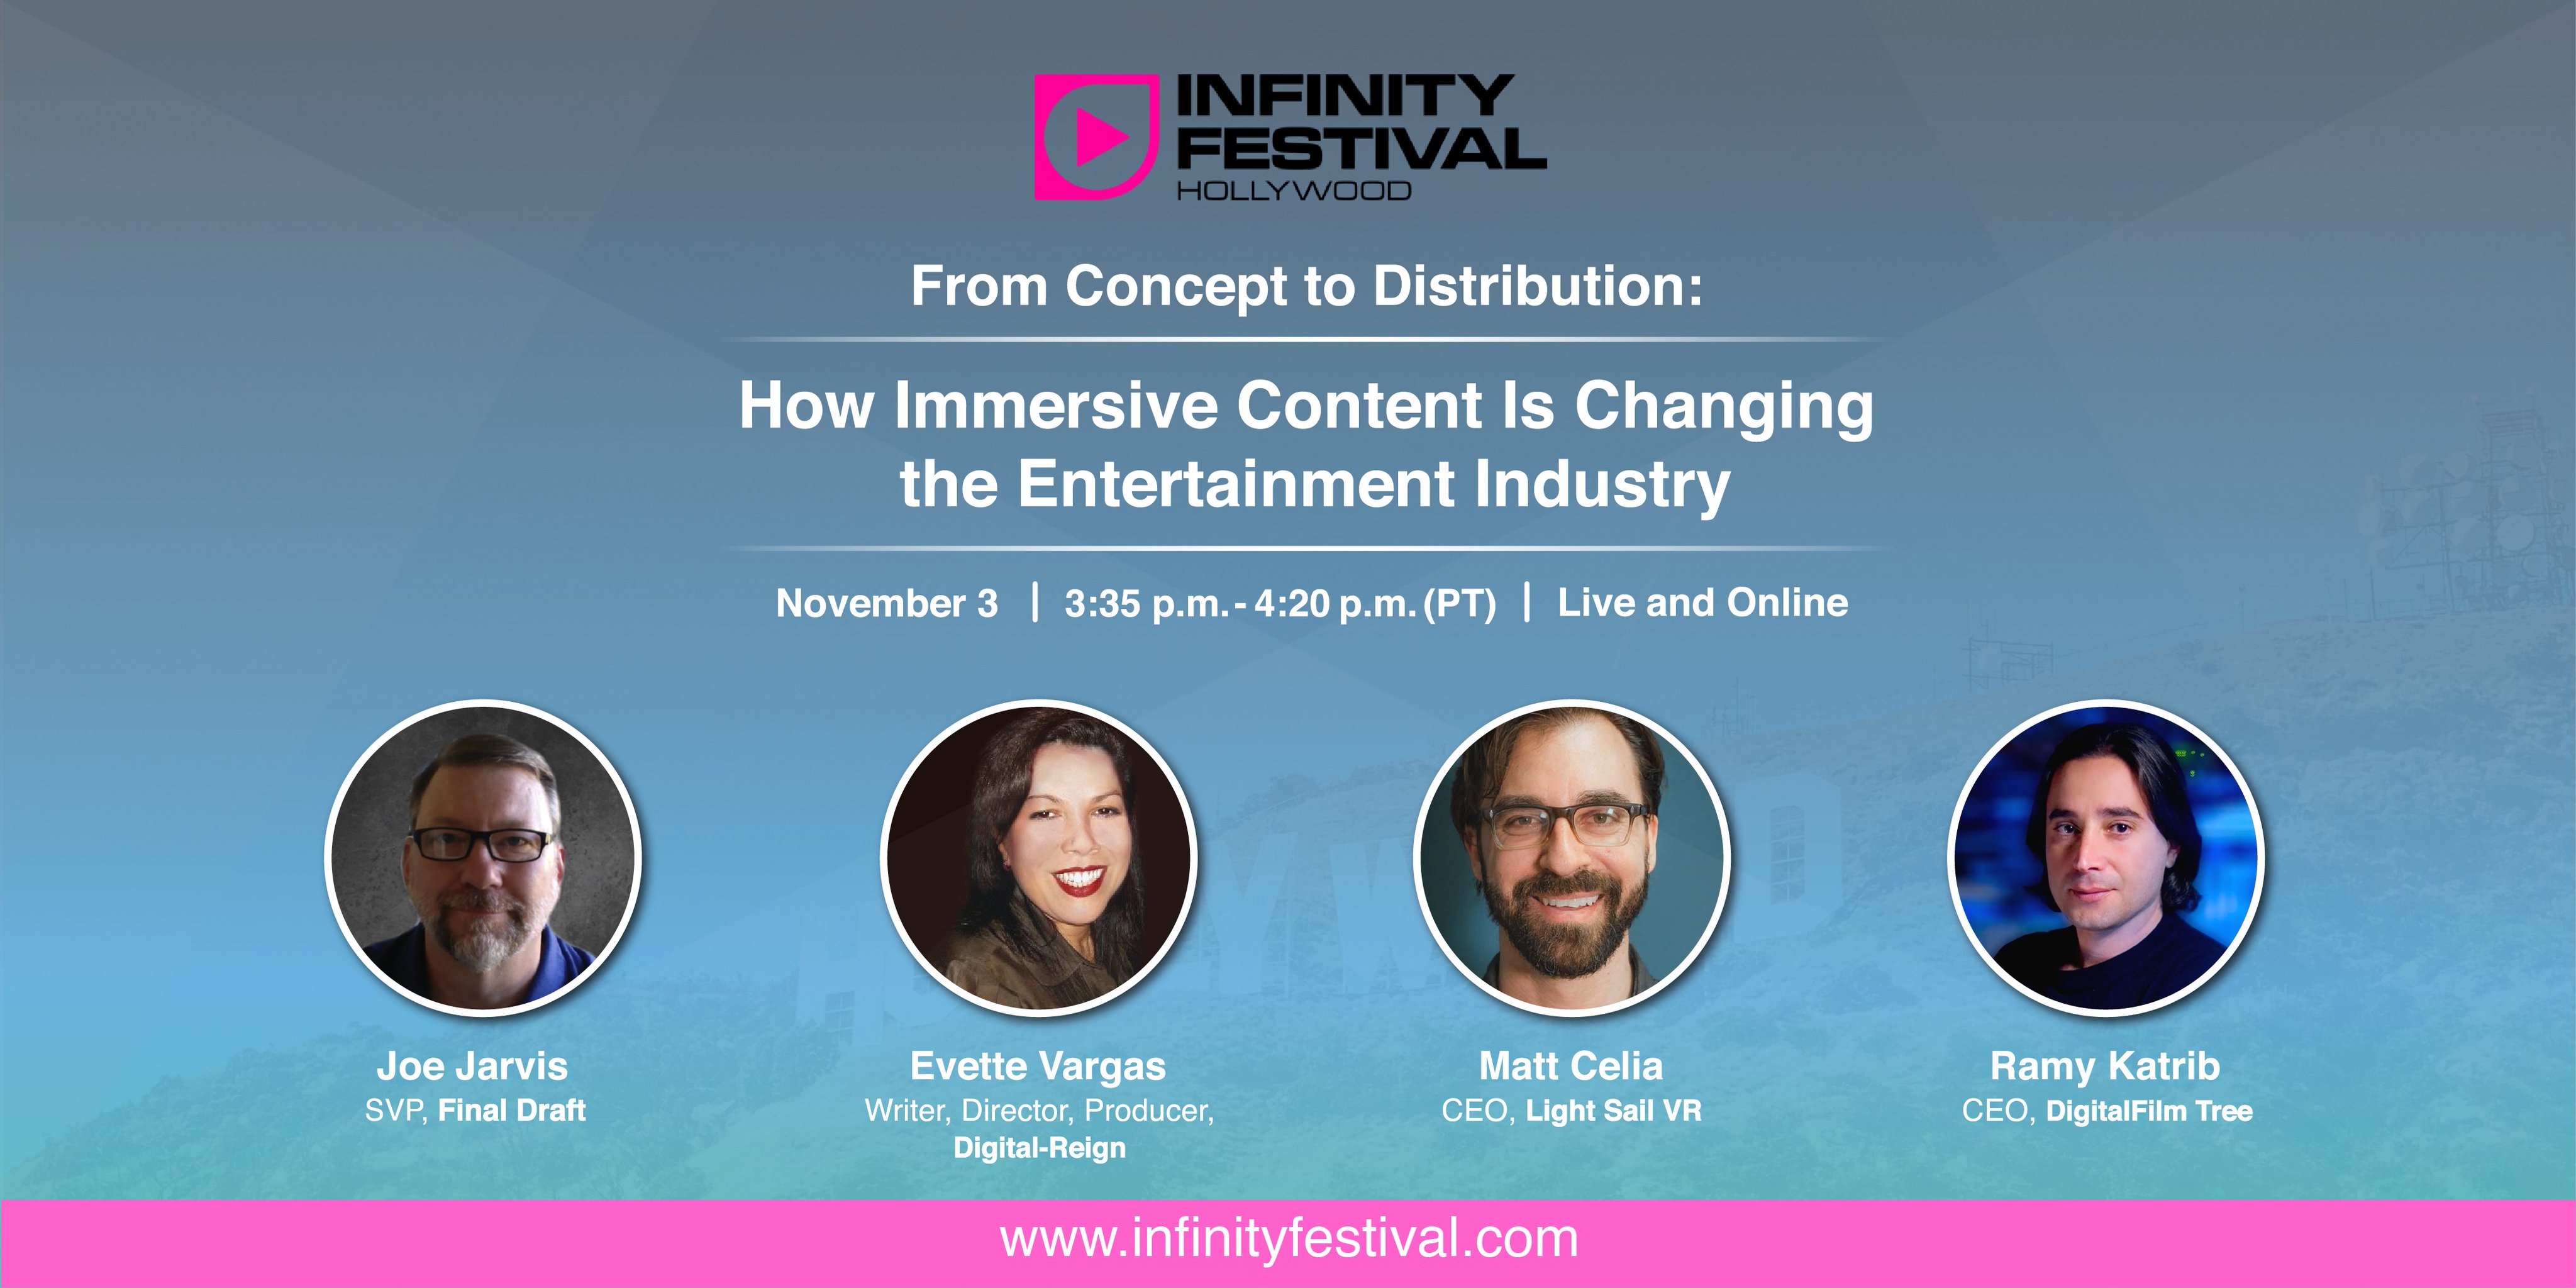 Infinity Fest 2021: From Concept to Distribution: How Immersive Content Is Changing the Entertainment Industry